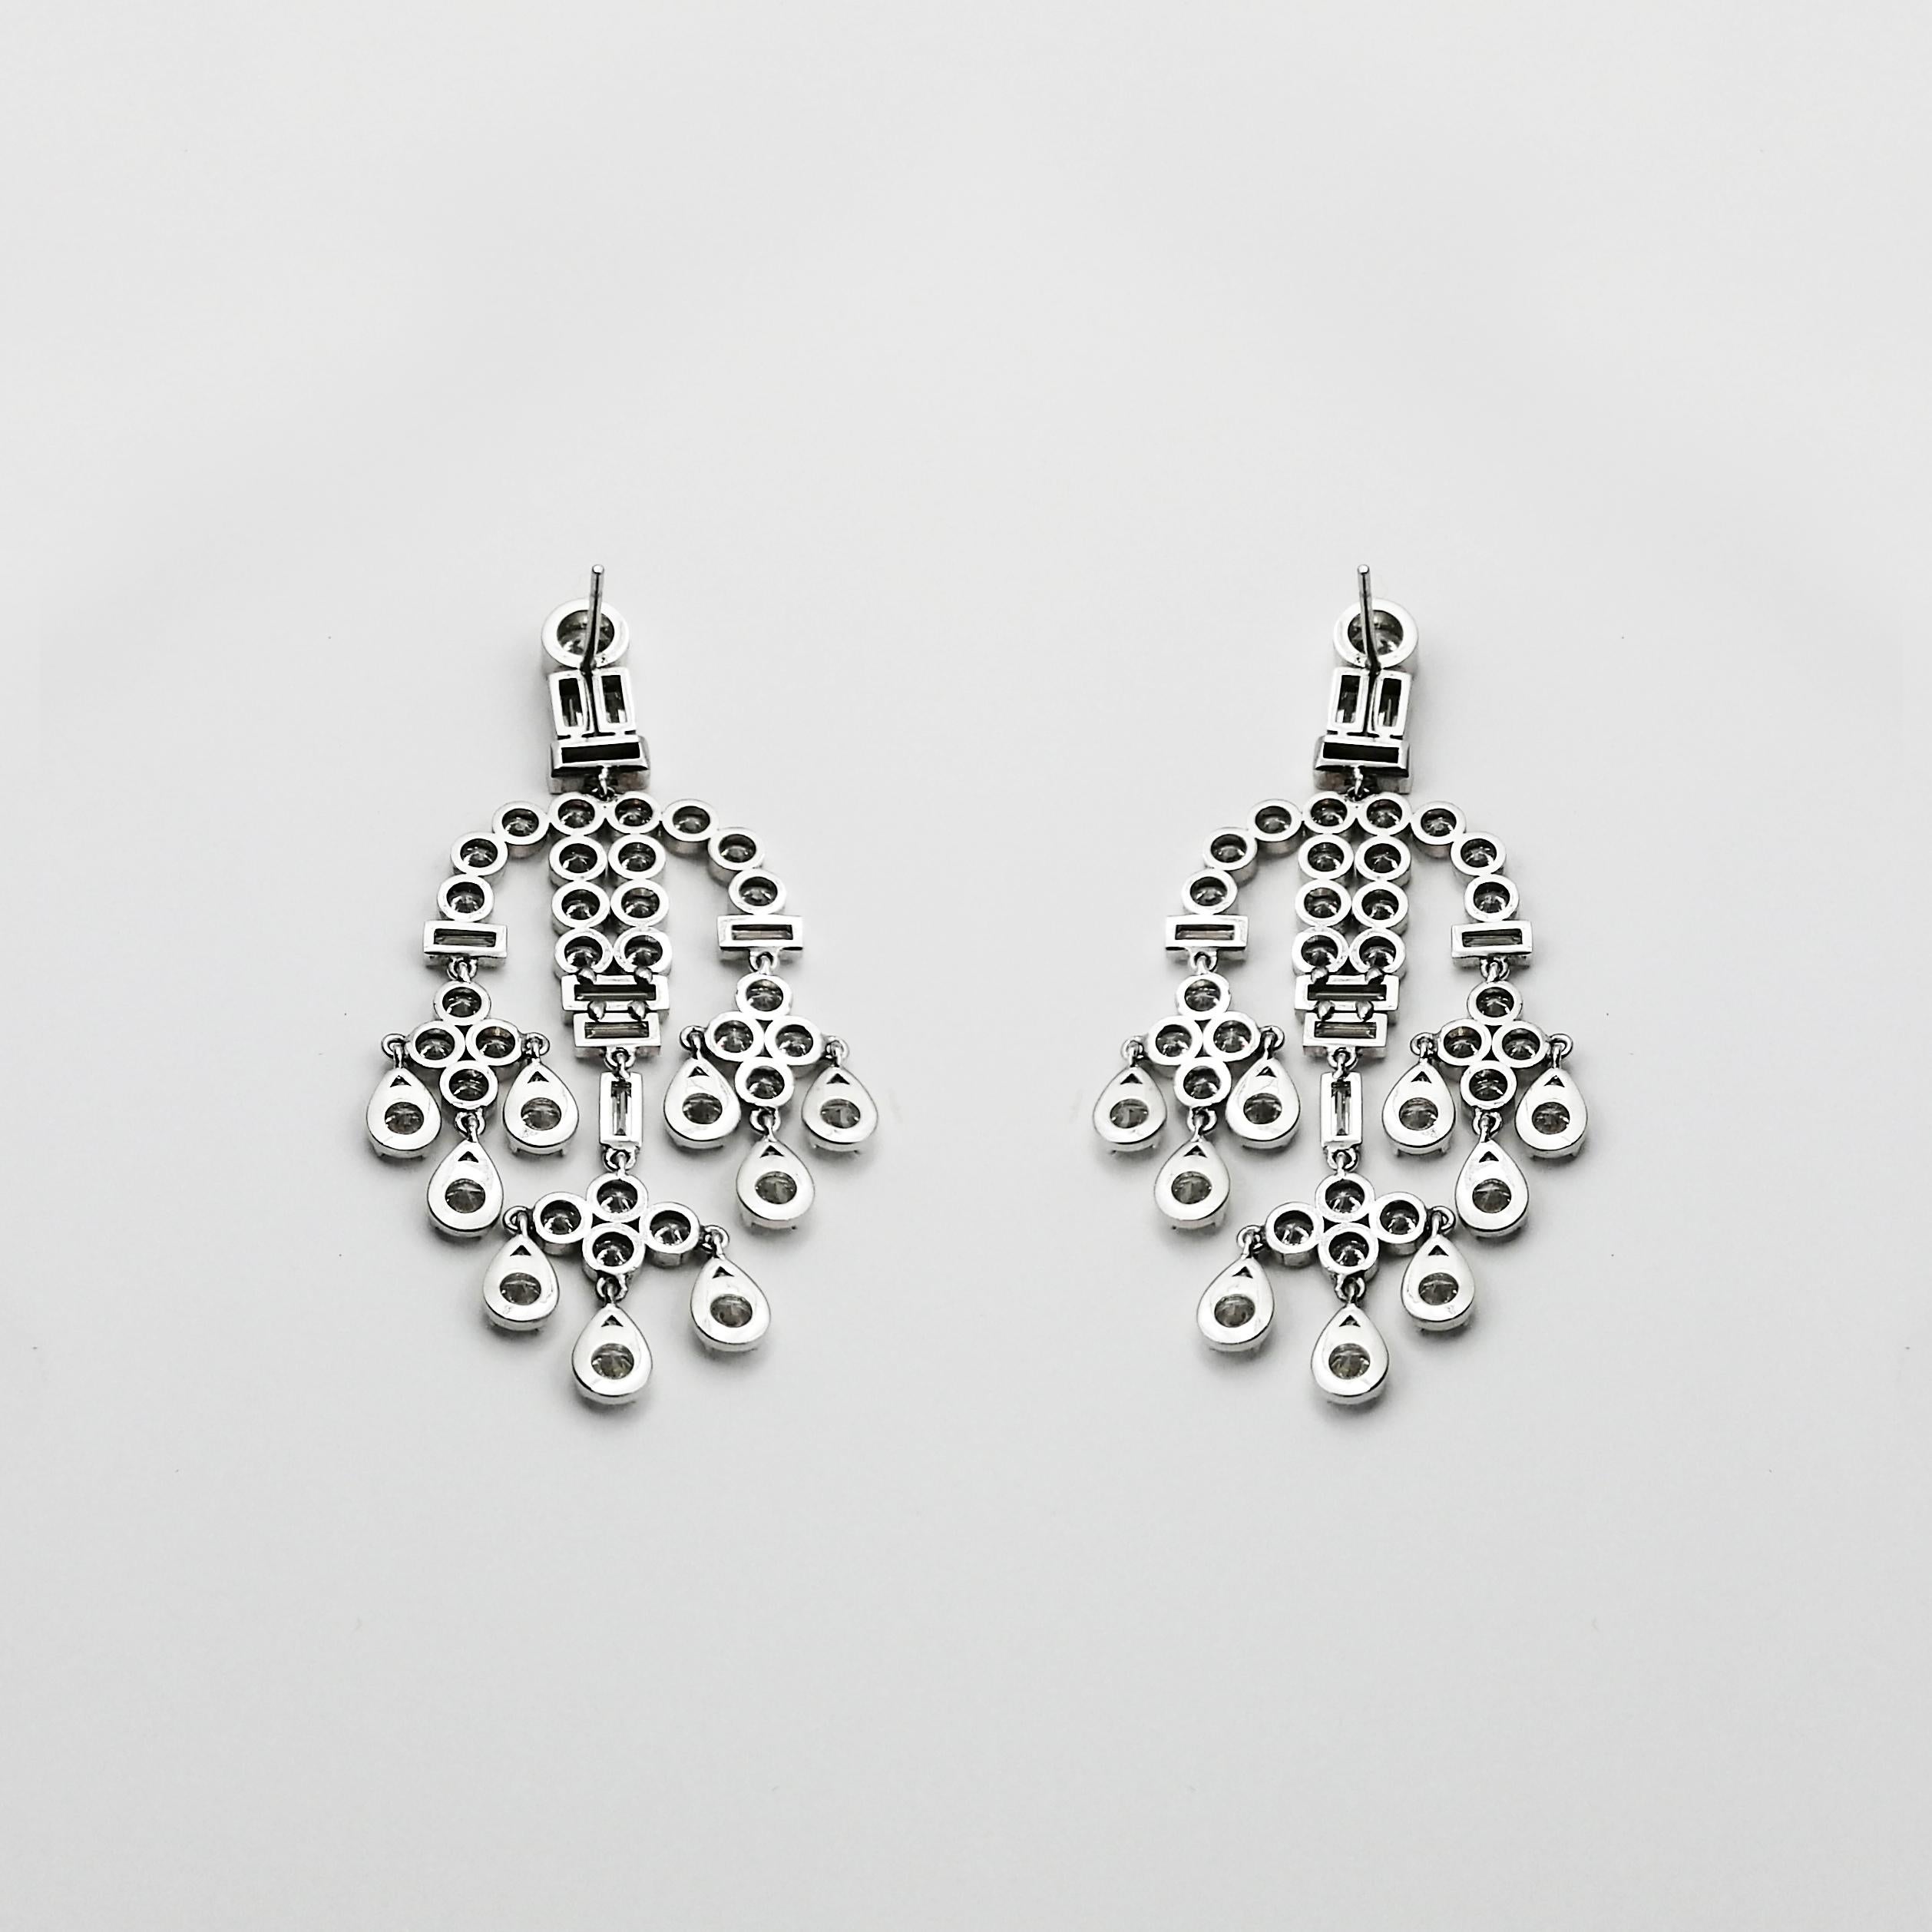 A precious arrangement of brilliant and baguette-cut diamonds, these timelessly elegant yet imposing earrings bring Art Déco design to its utmost glamorous form. The delicate structure is crafted from 18 carat white gold embraces 15.9 carats of